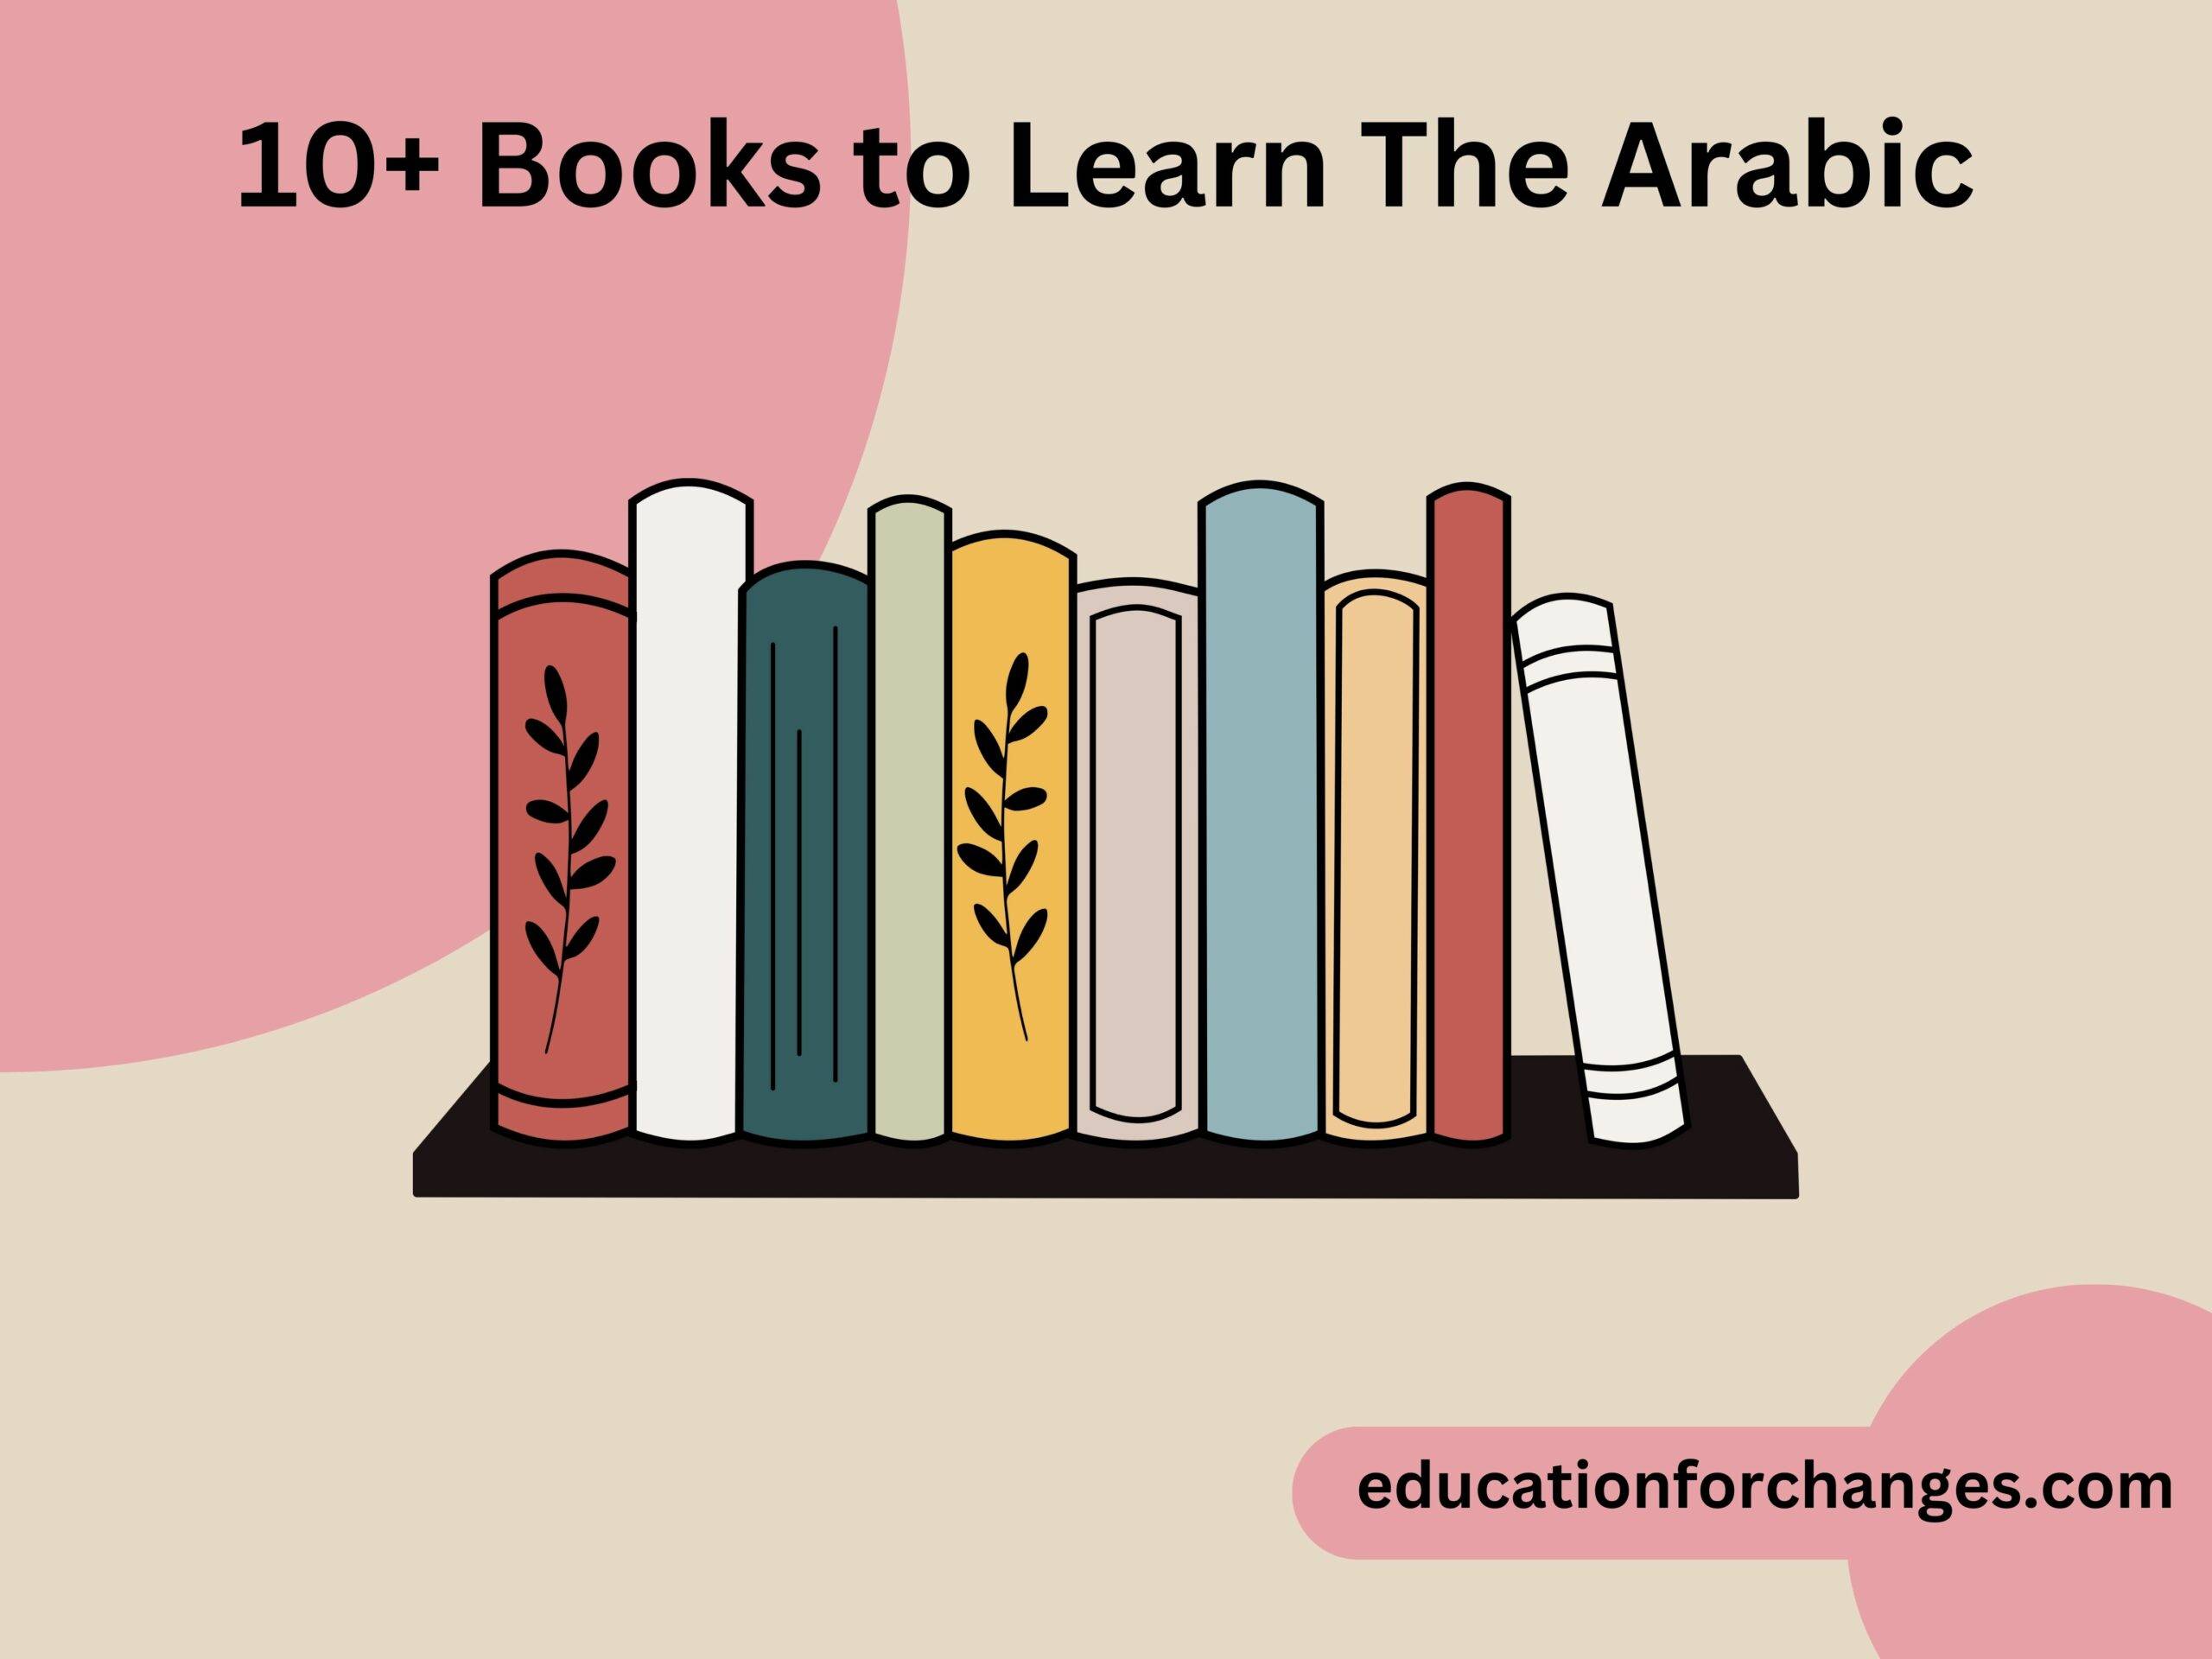 10+ Books to Learn The Arabic